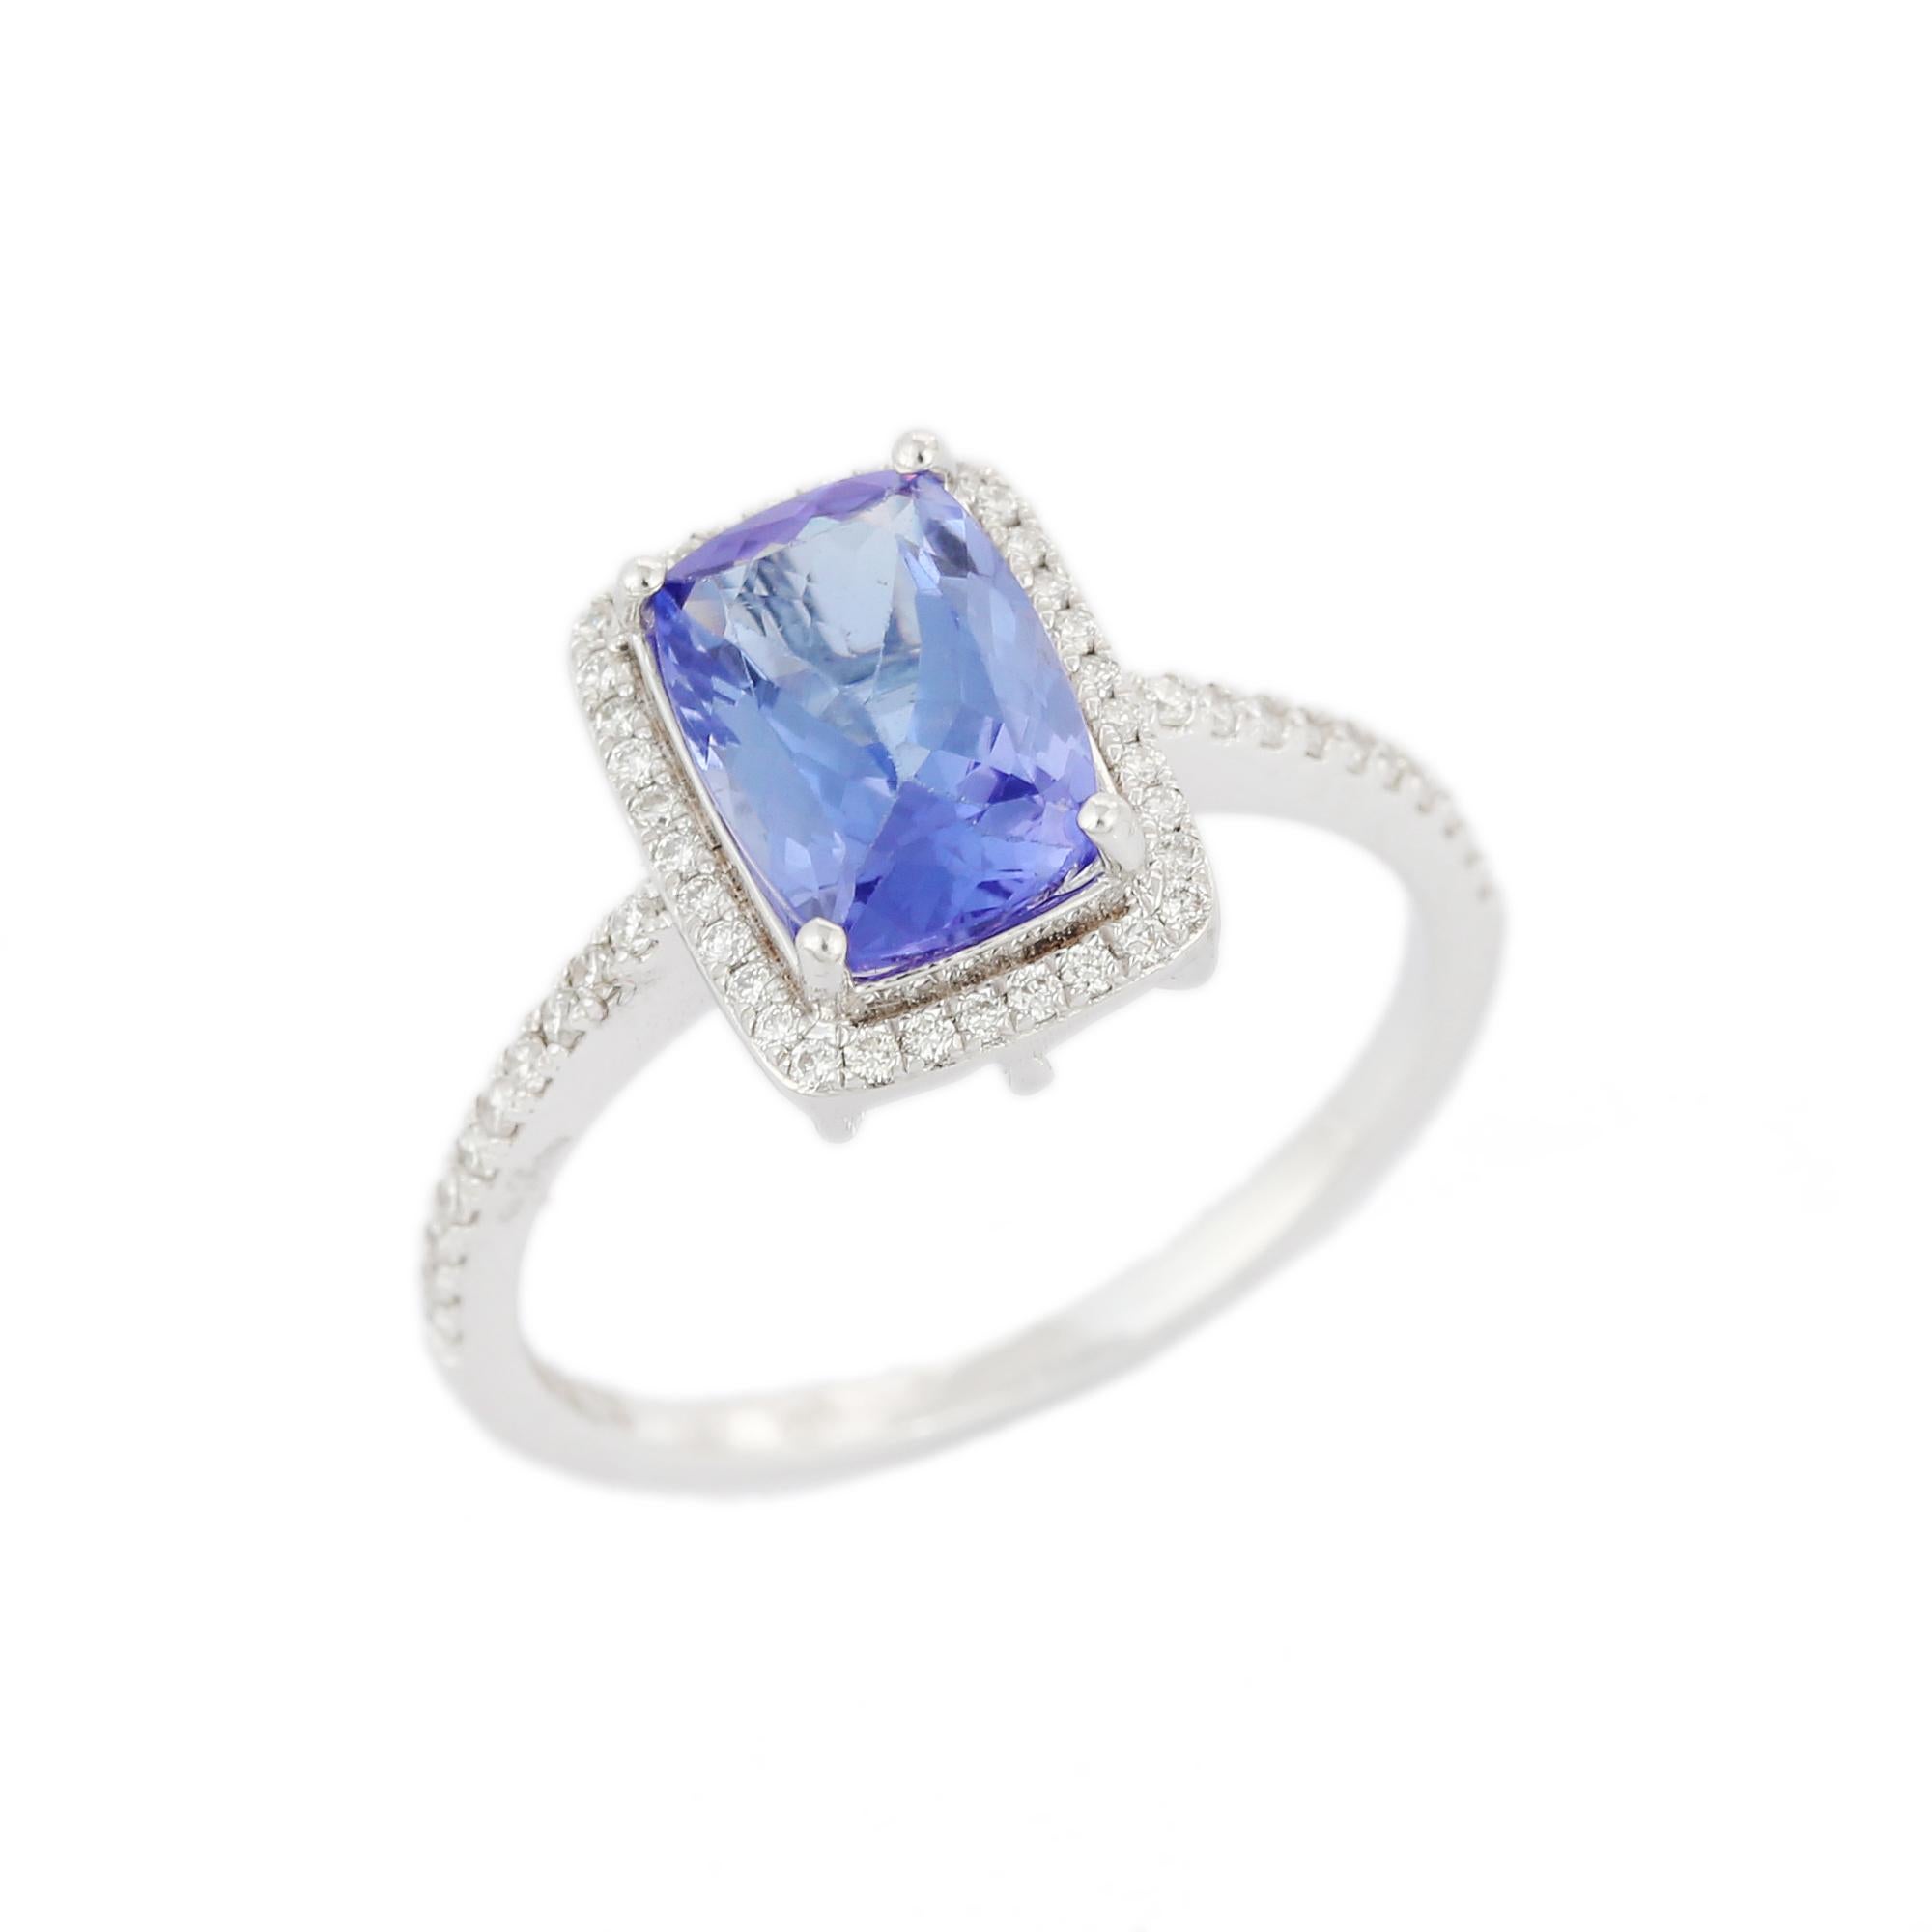 For Sale:  1.76 Carat Tanzanite and Diamond Ring in 18K White Gold 3